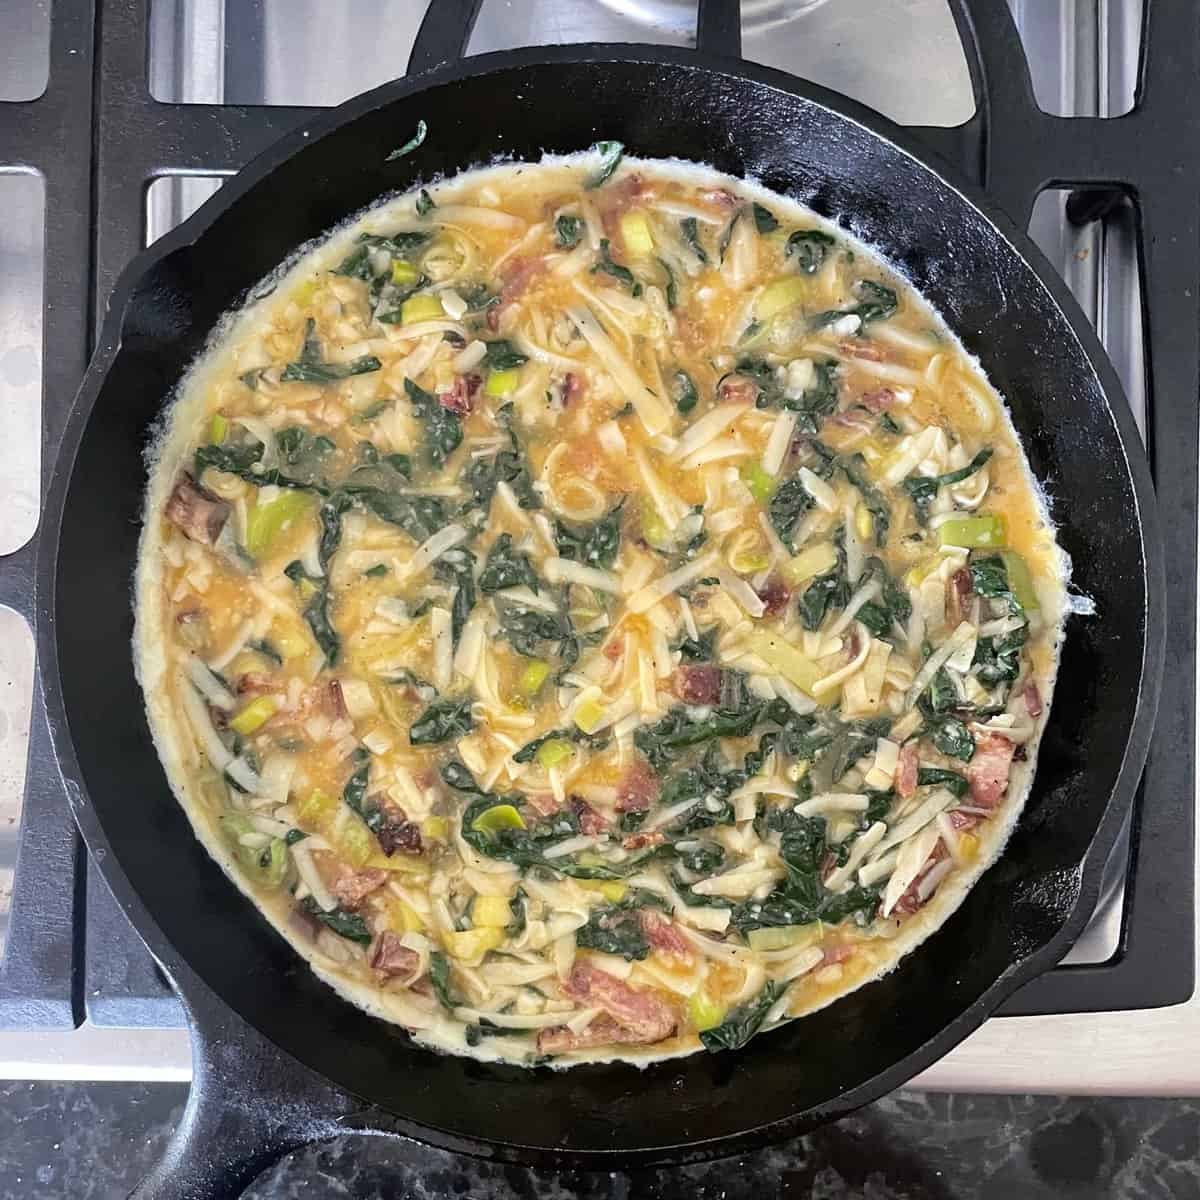 bacon, kale, and leek frittata mixture in the cast iron skillet ready for baking.